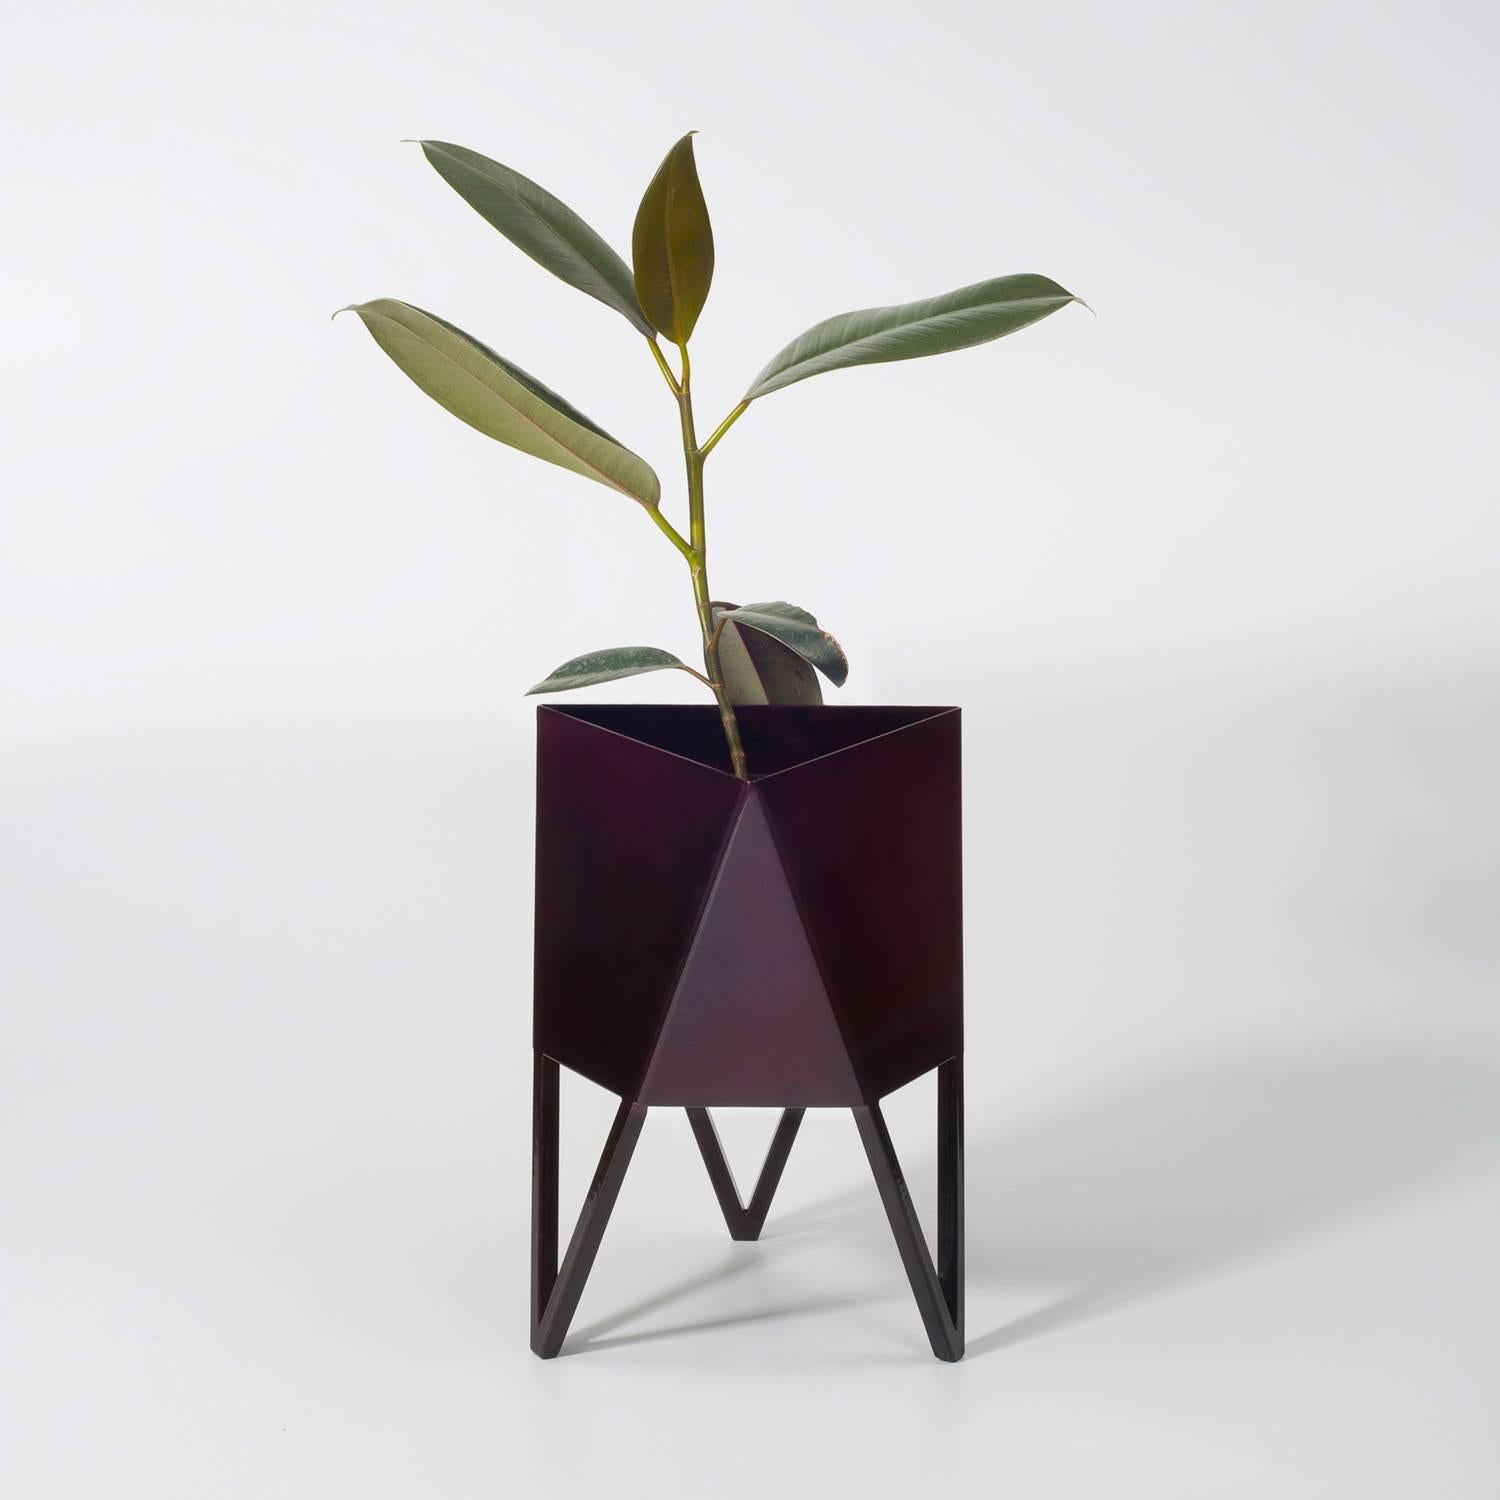 Deca Planter in Glossy White Steel, Medium, by Force/Collide 1